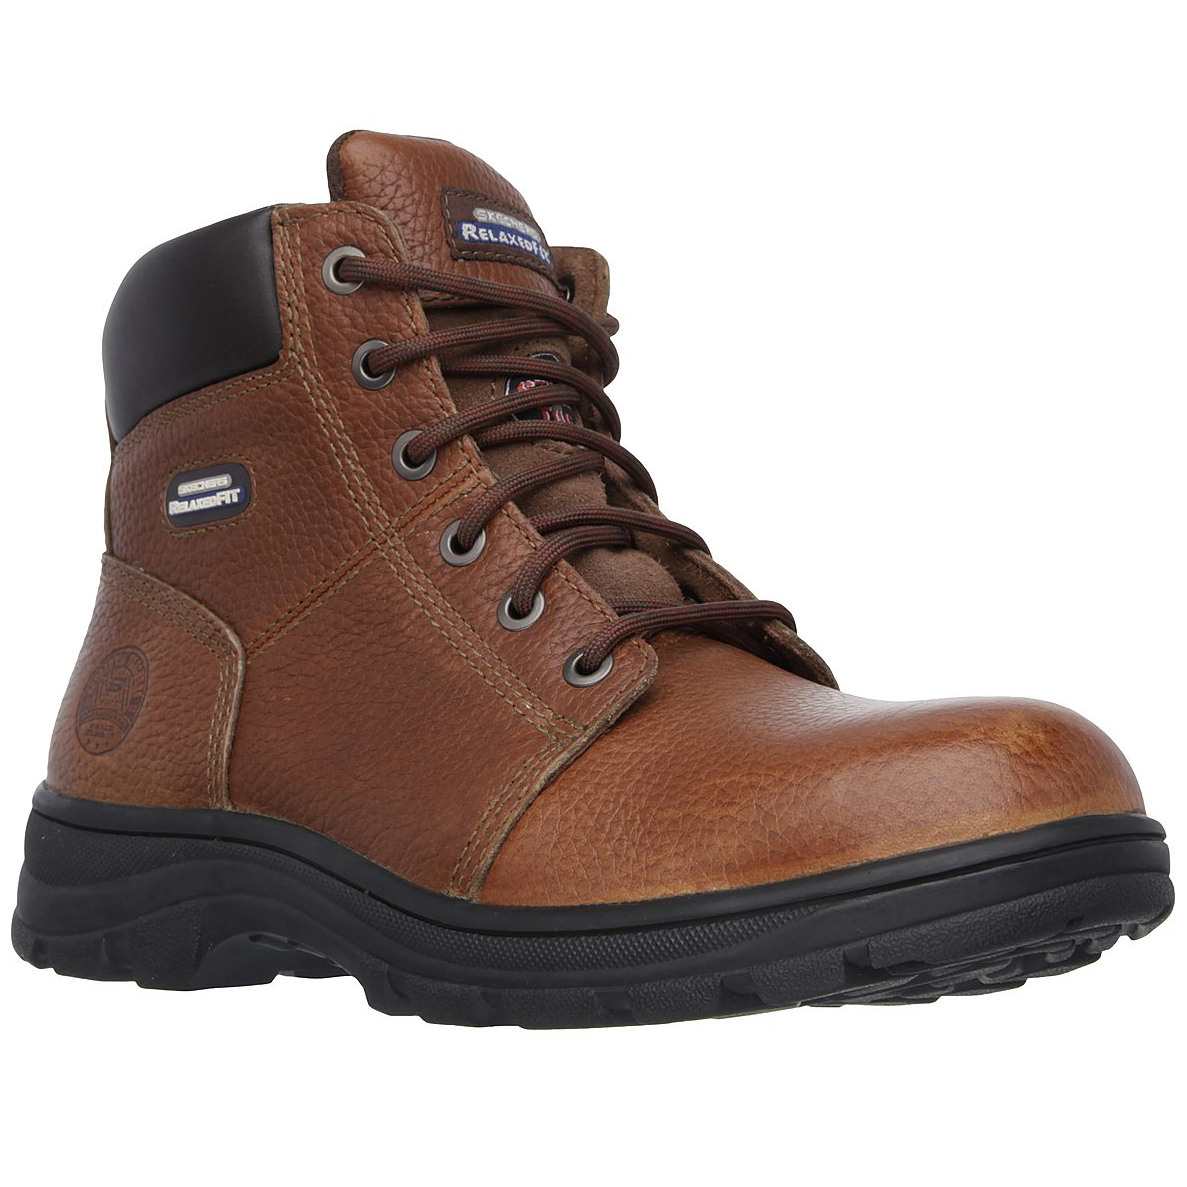 Skechers Men's 6 In. Work: Relaxed Fit - Workshire Steel Toe Work Boots - Brown, 11